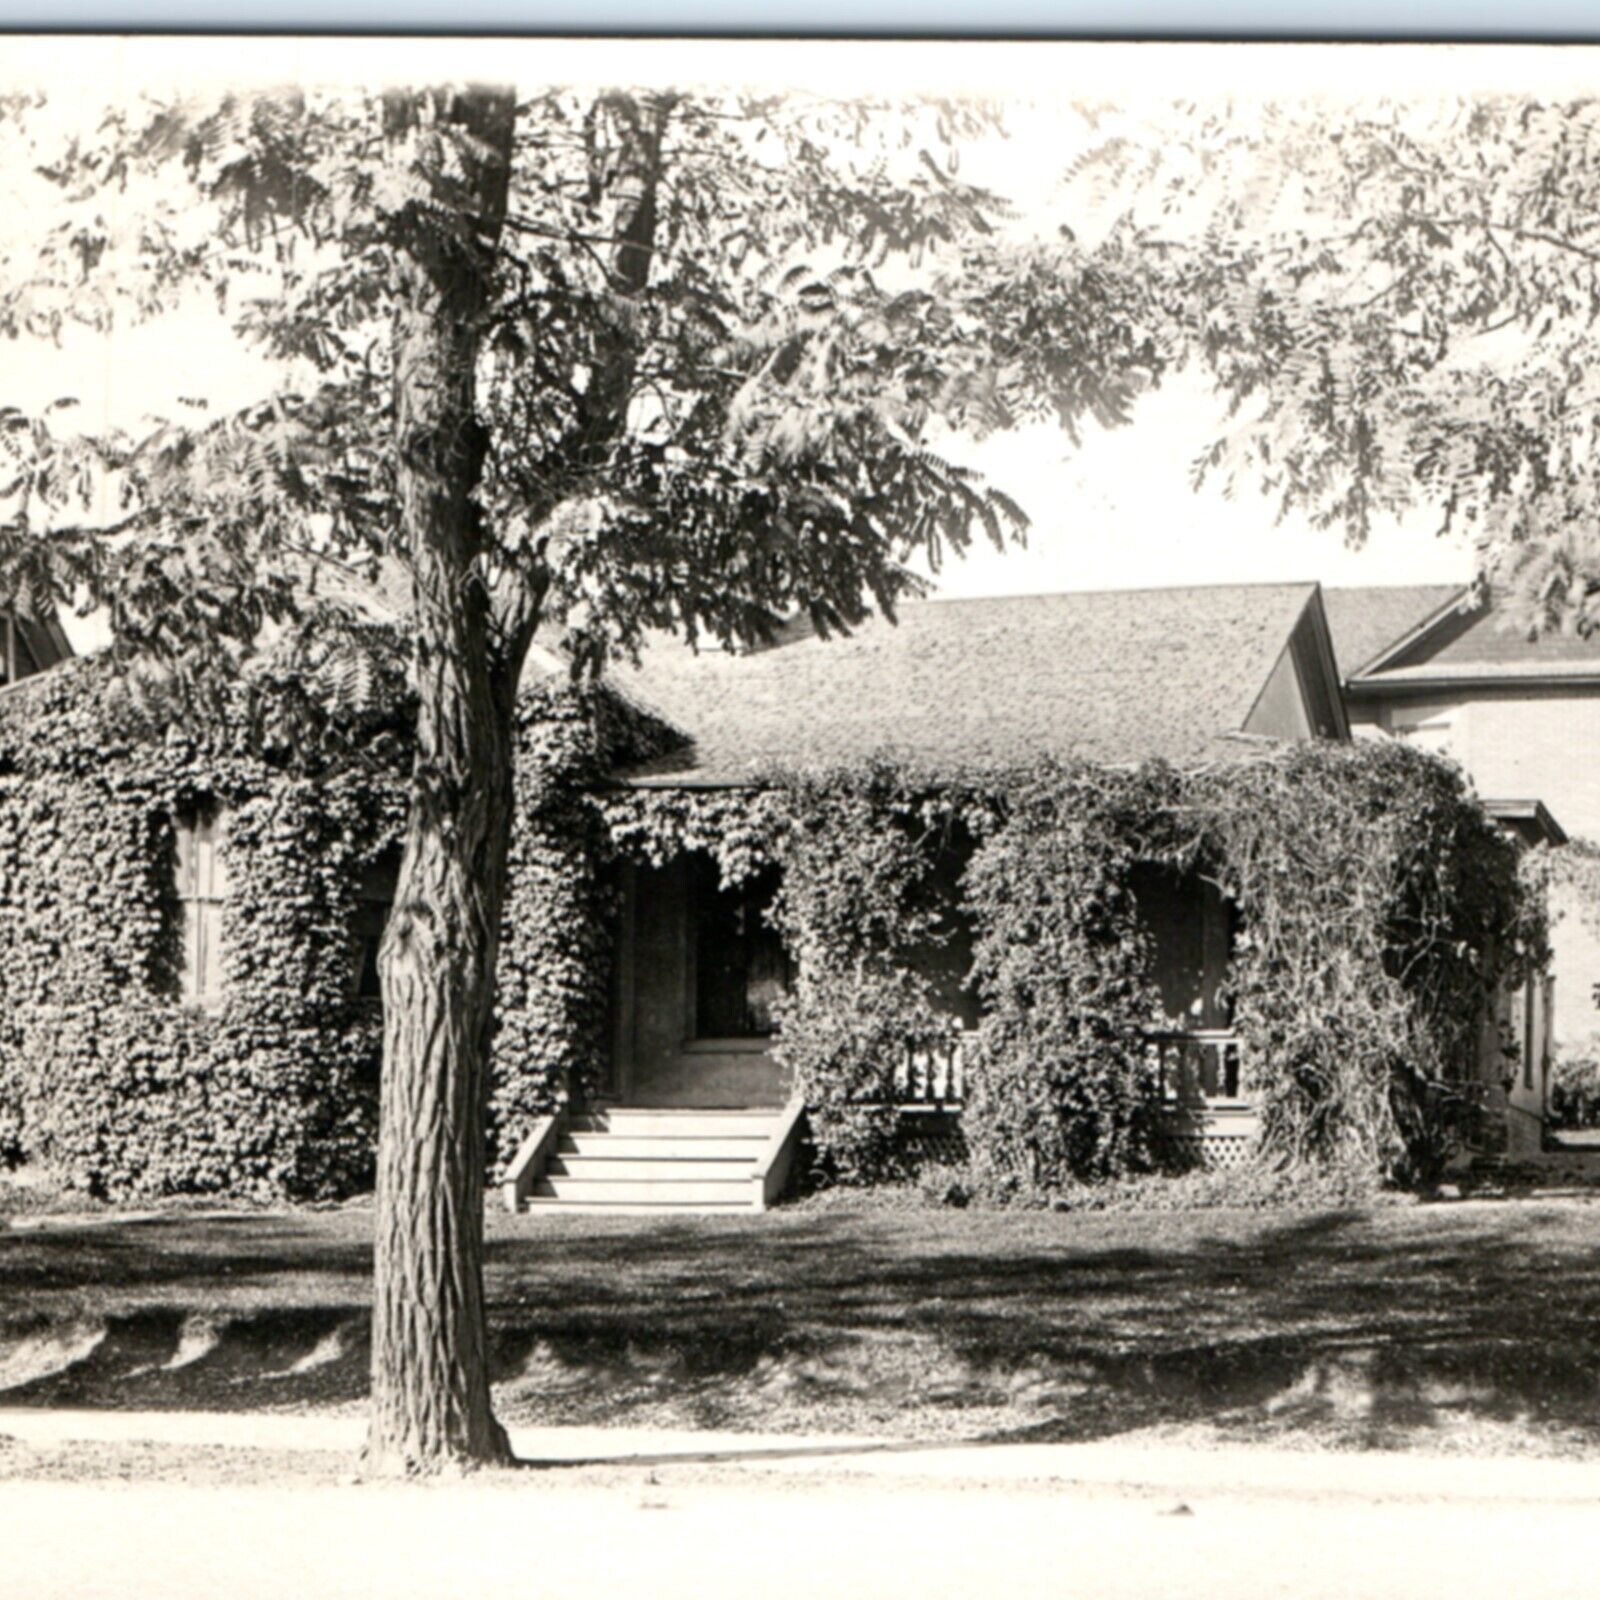 c1910s Lovely House Covered in Vines RPPC Town Home Real Photo Postcard A134